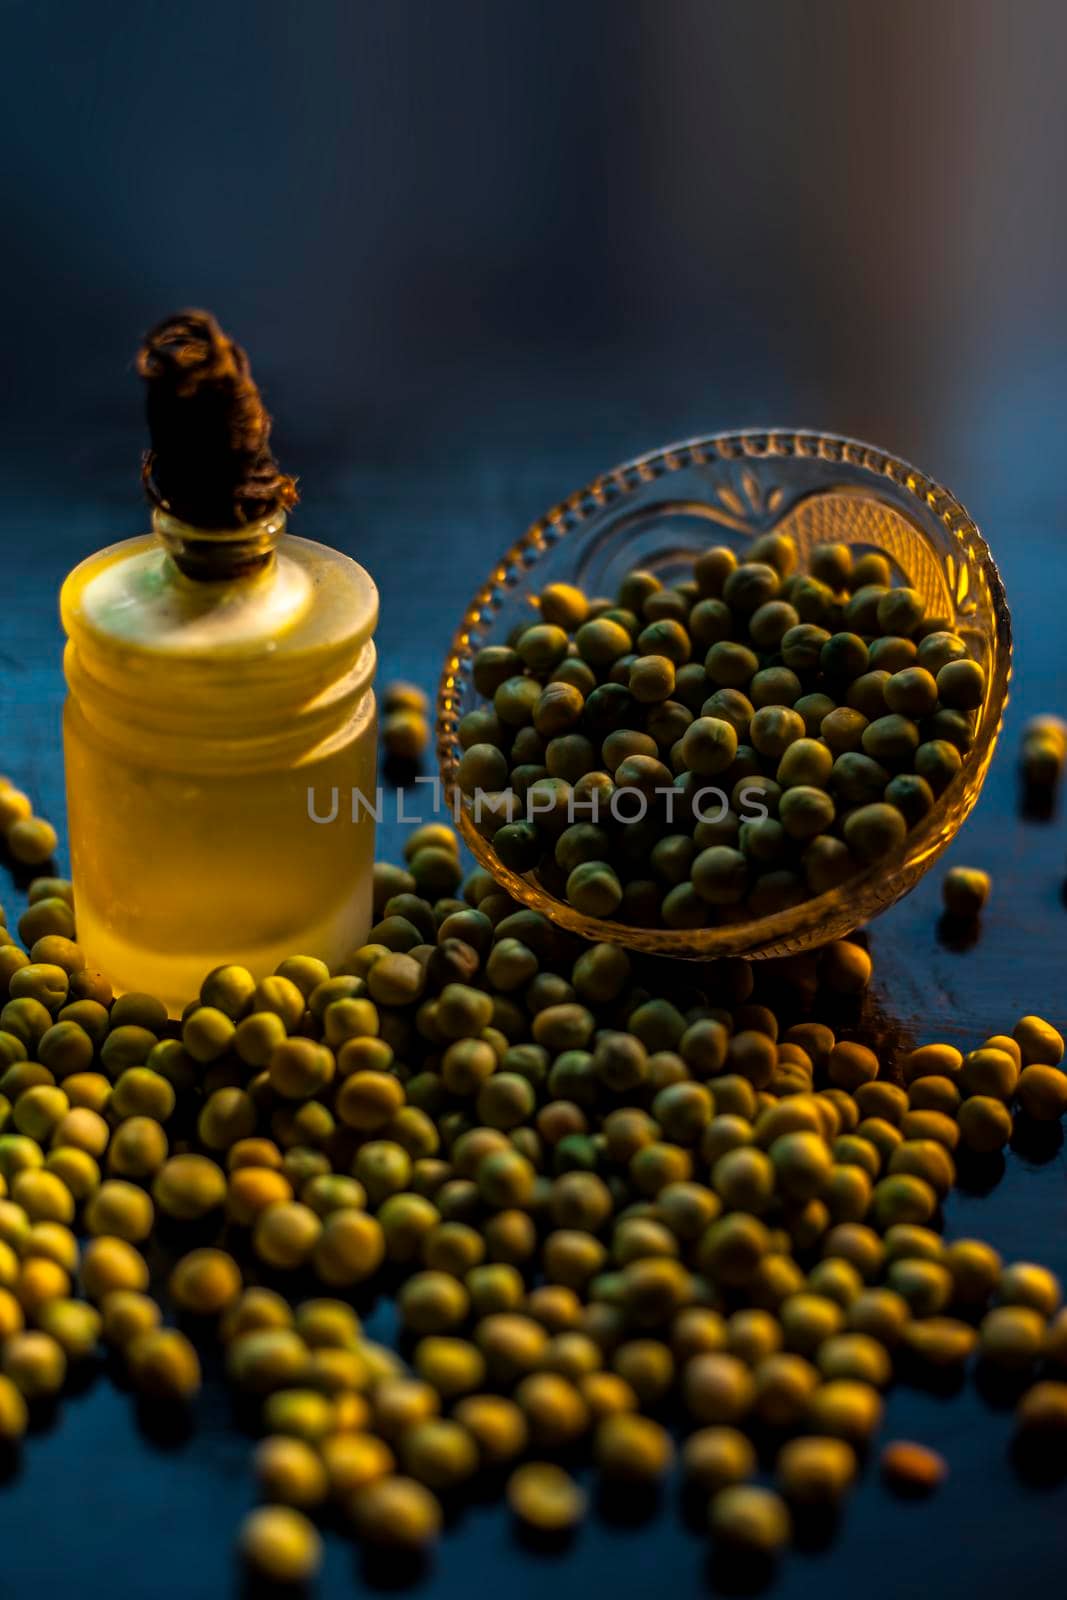 Shot of a bowl of green peas along with its extracted oil in a glass bottle on a black surface.